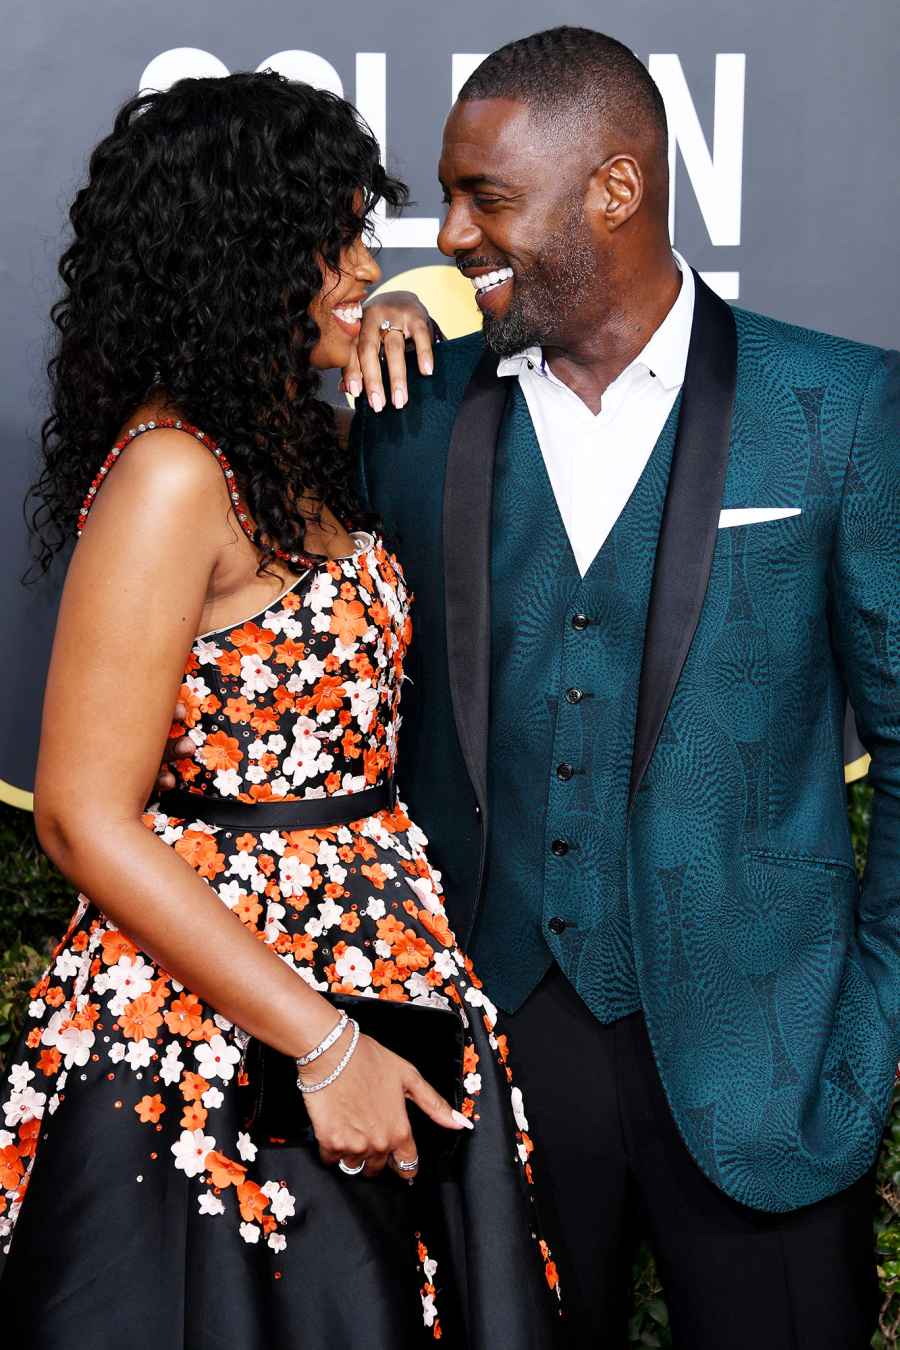 Sabrina Dhowr and Idris Elba attend the 76th Annual Golden Globe Awards 2019